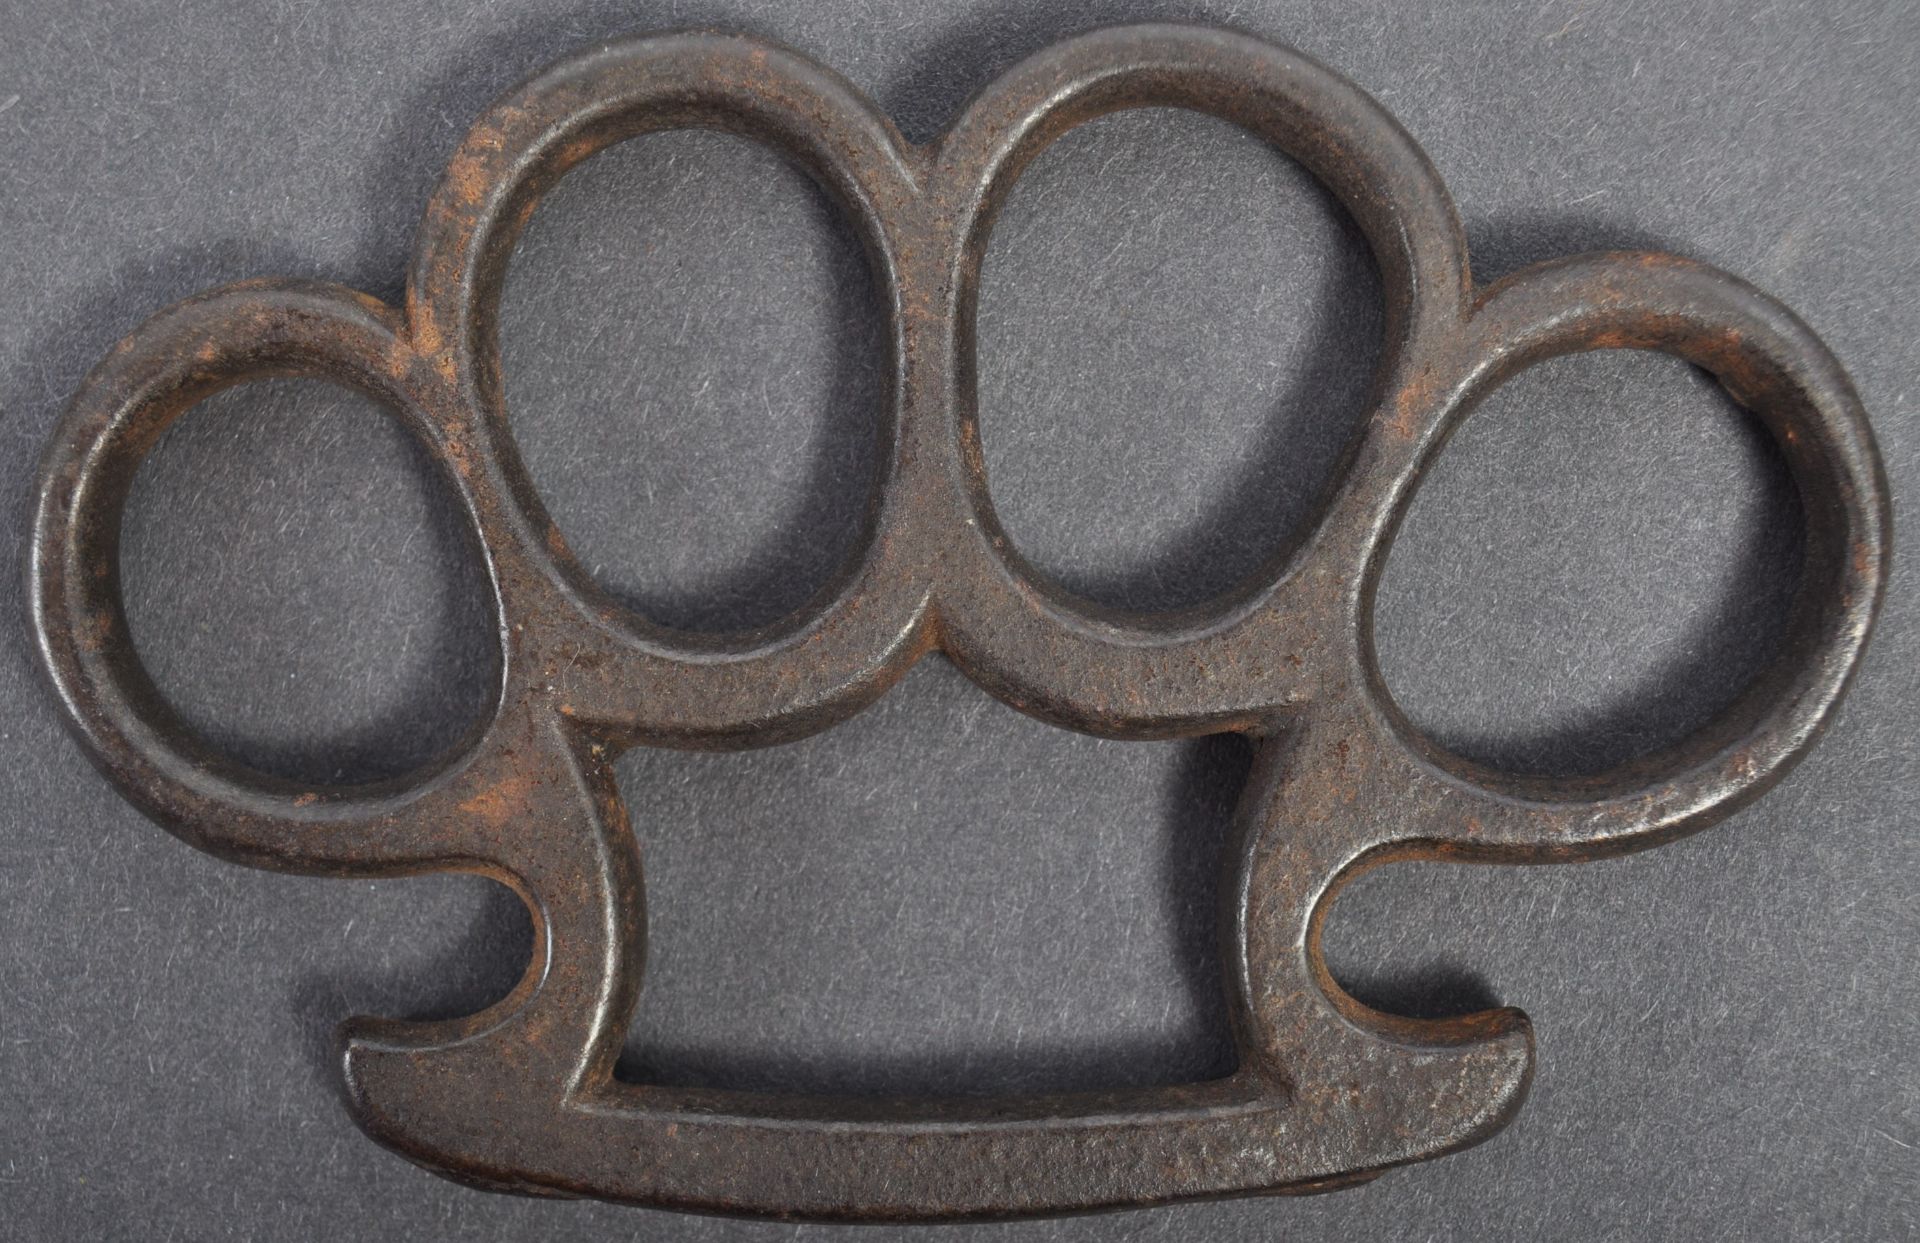 WWI FIRST WORLD WAR KNUCKLE DUSTER / BRASS KNUCKLES - Image 2 of 2